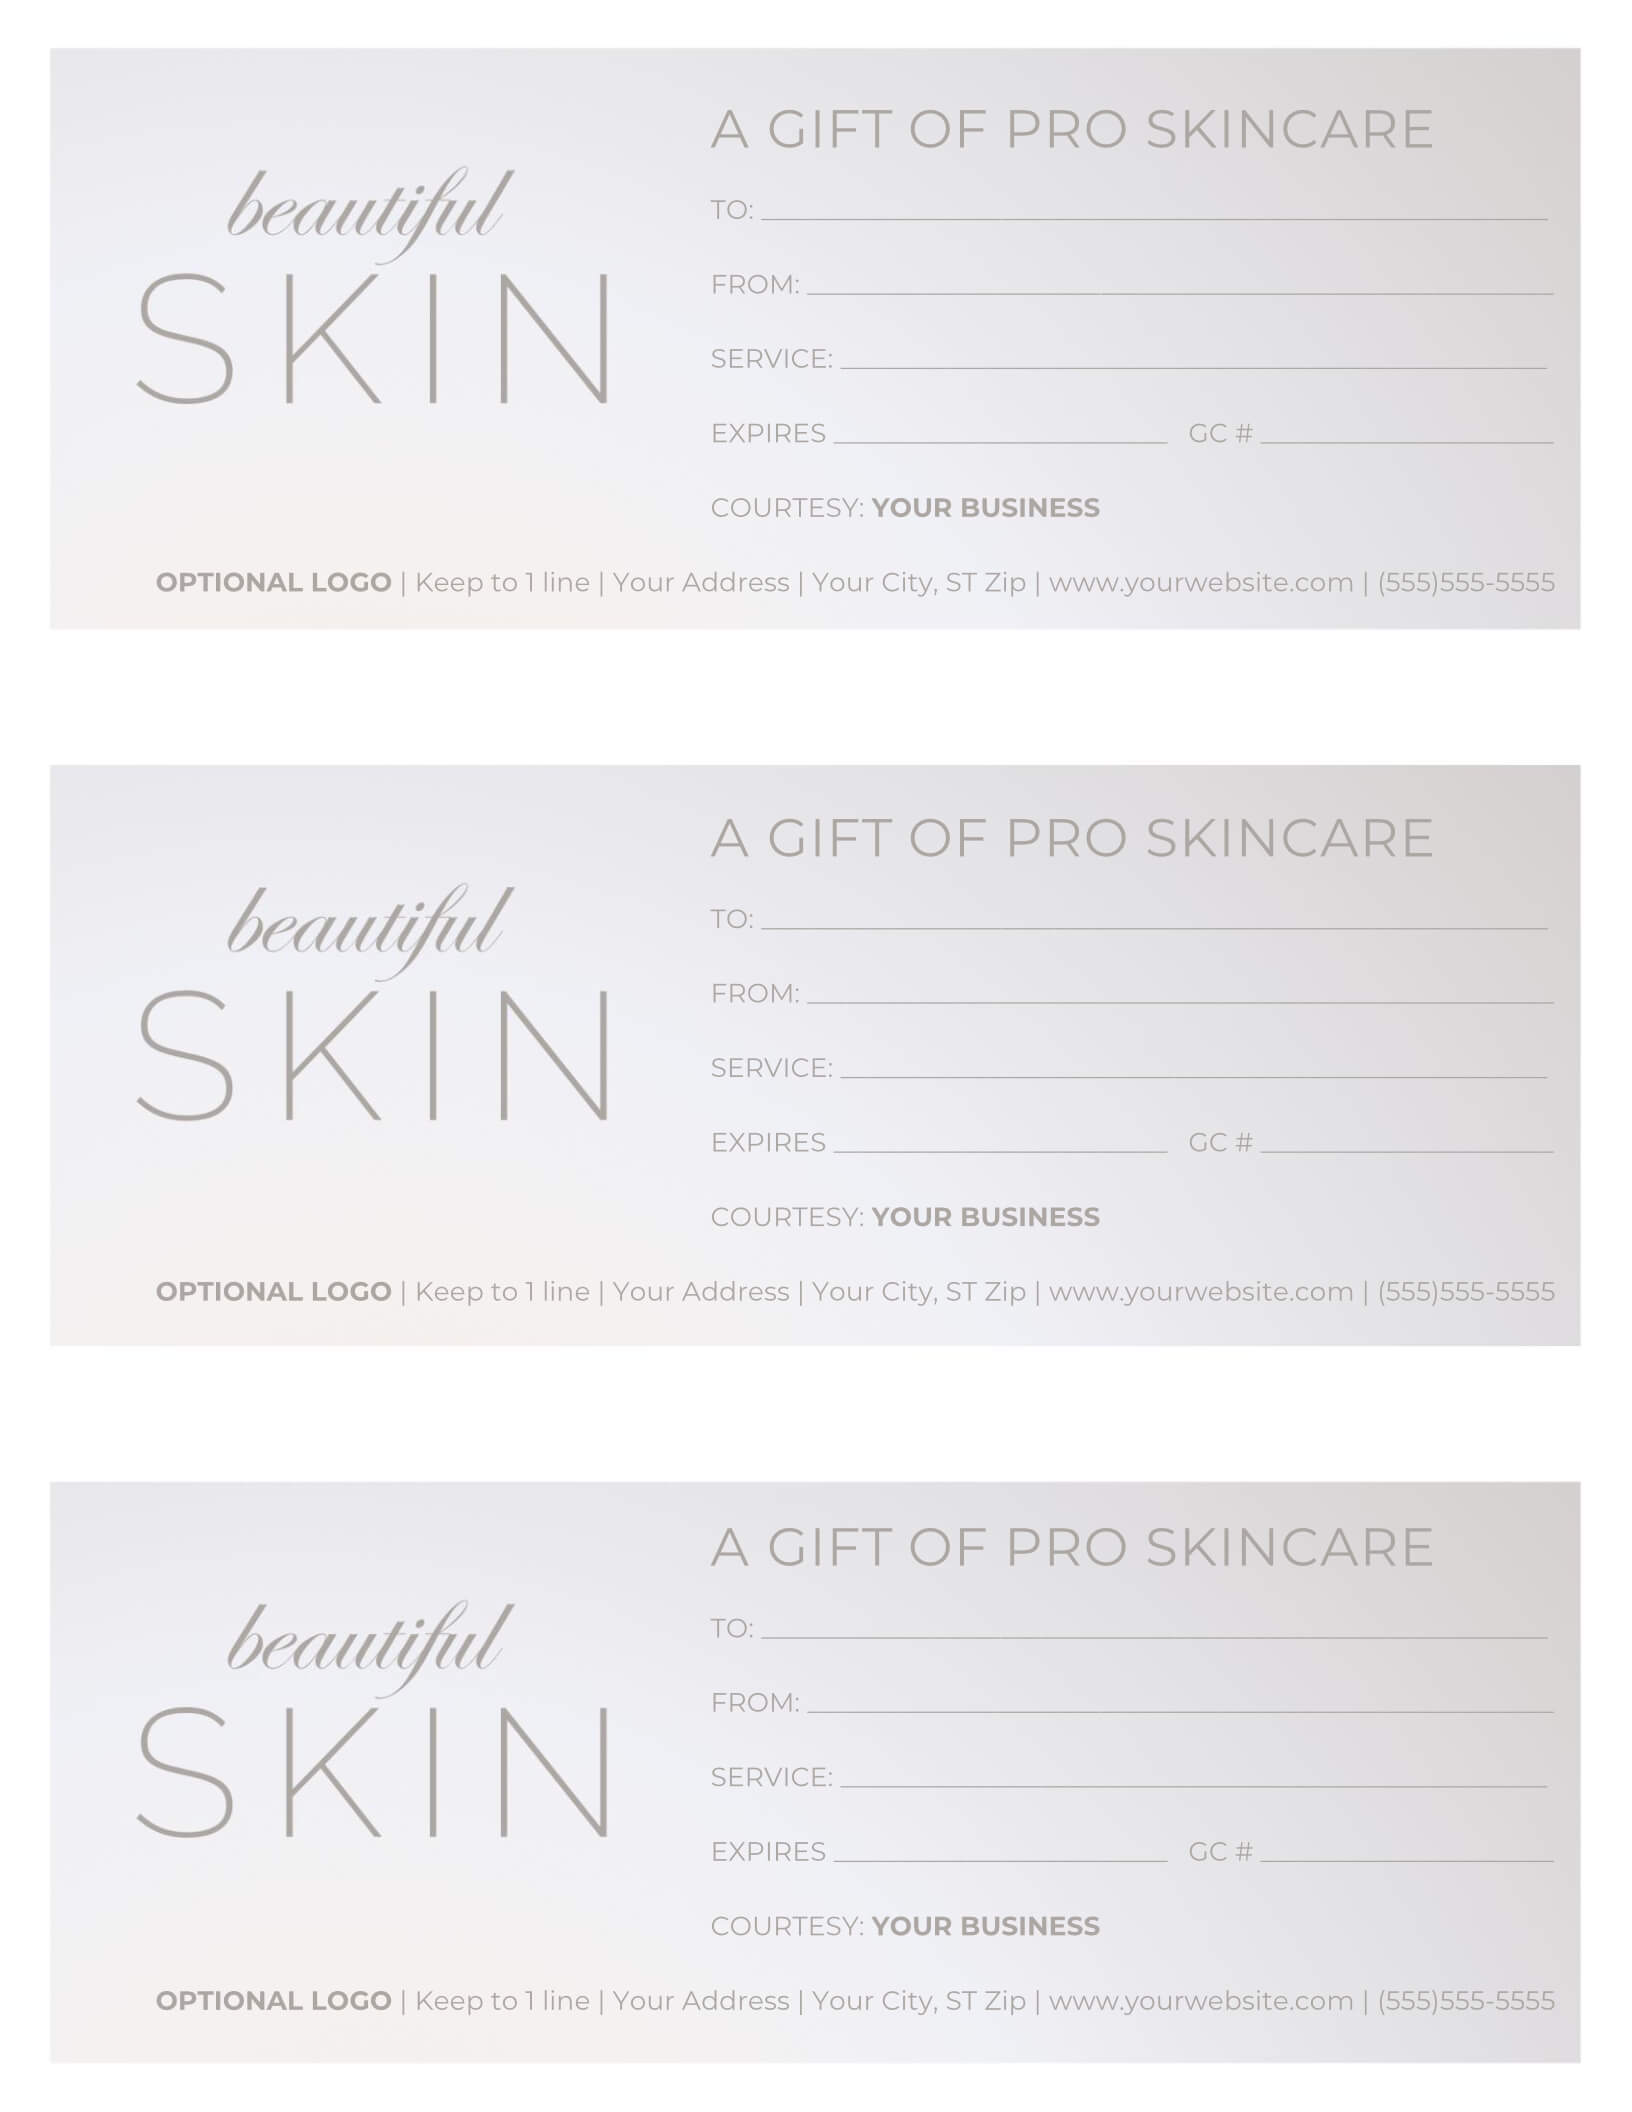 Free Gift Certificate Templates For Massage And Spa Pertaining To Massage Gift Certificate Template Free Printable